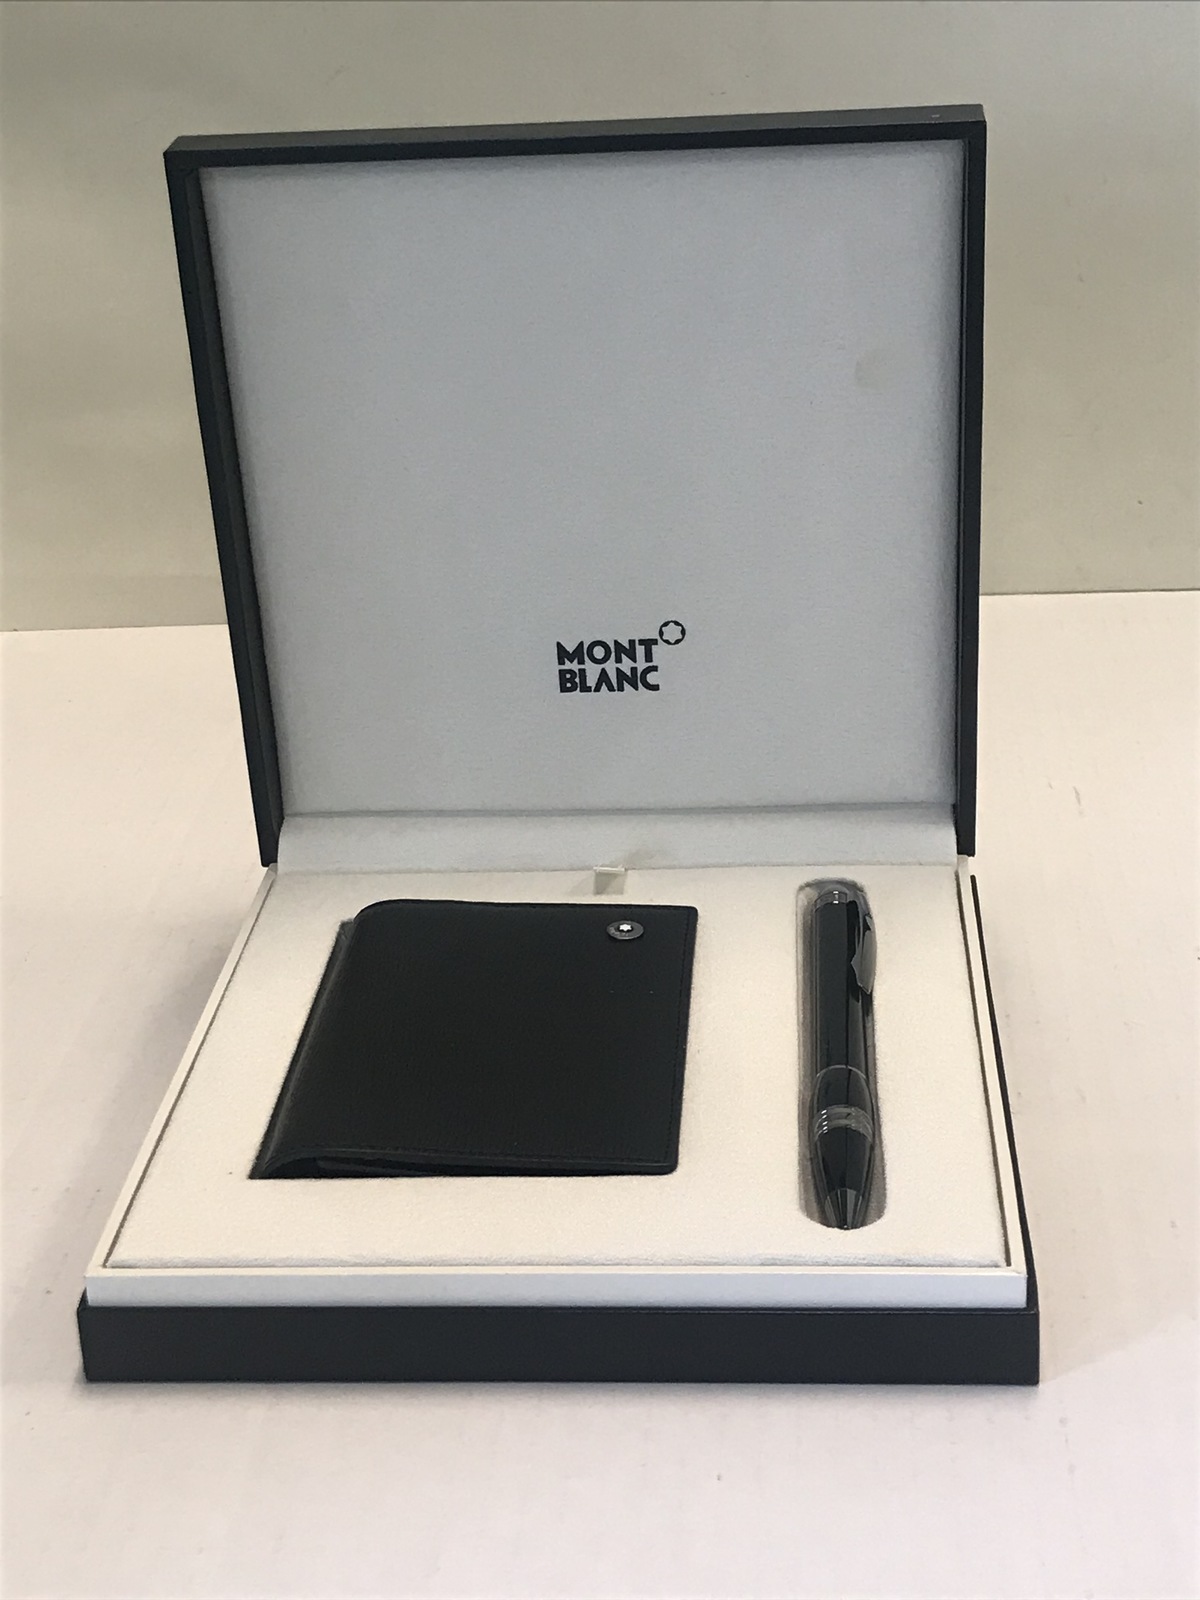 New Montblanc Ballpoint Pen With Card Holder Contemporary Business Set XG4396 MB - $575.00